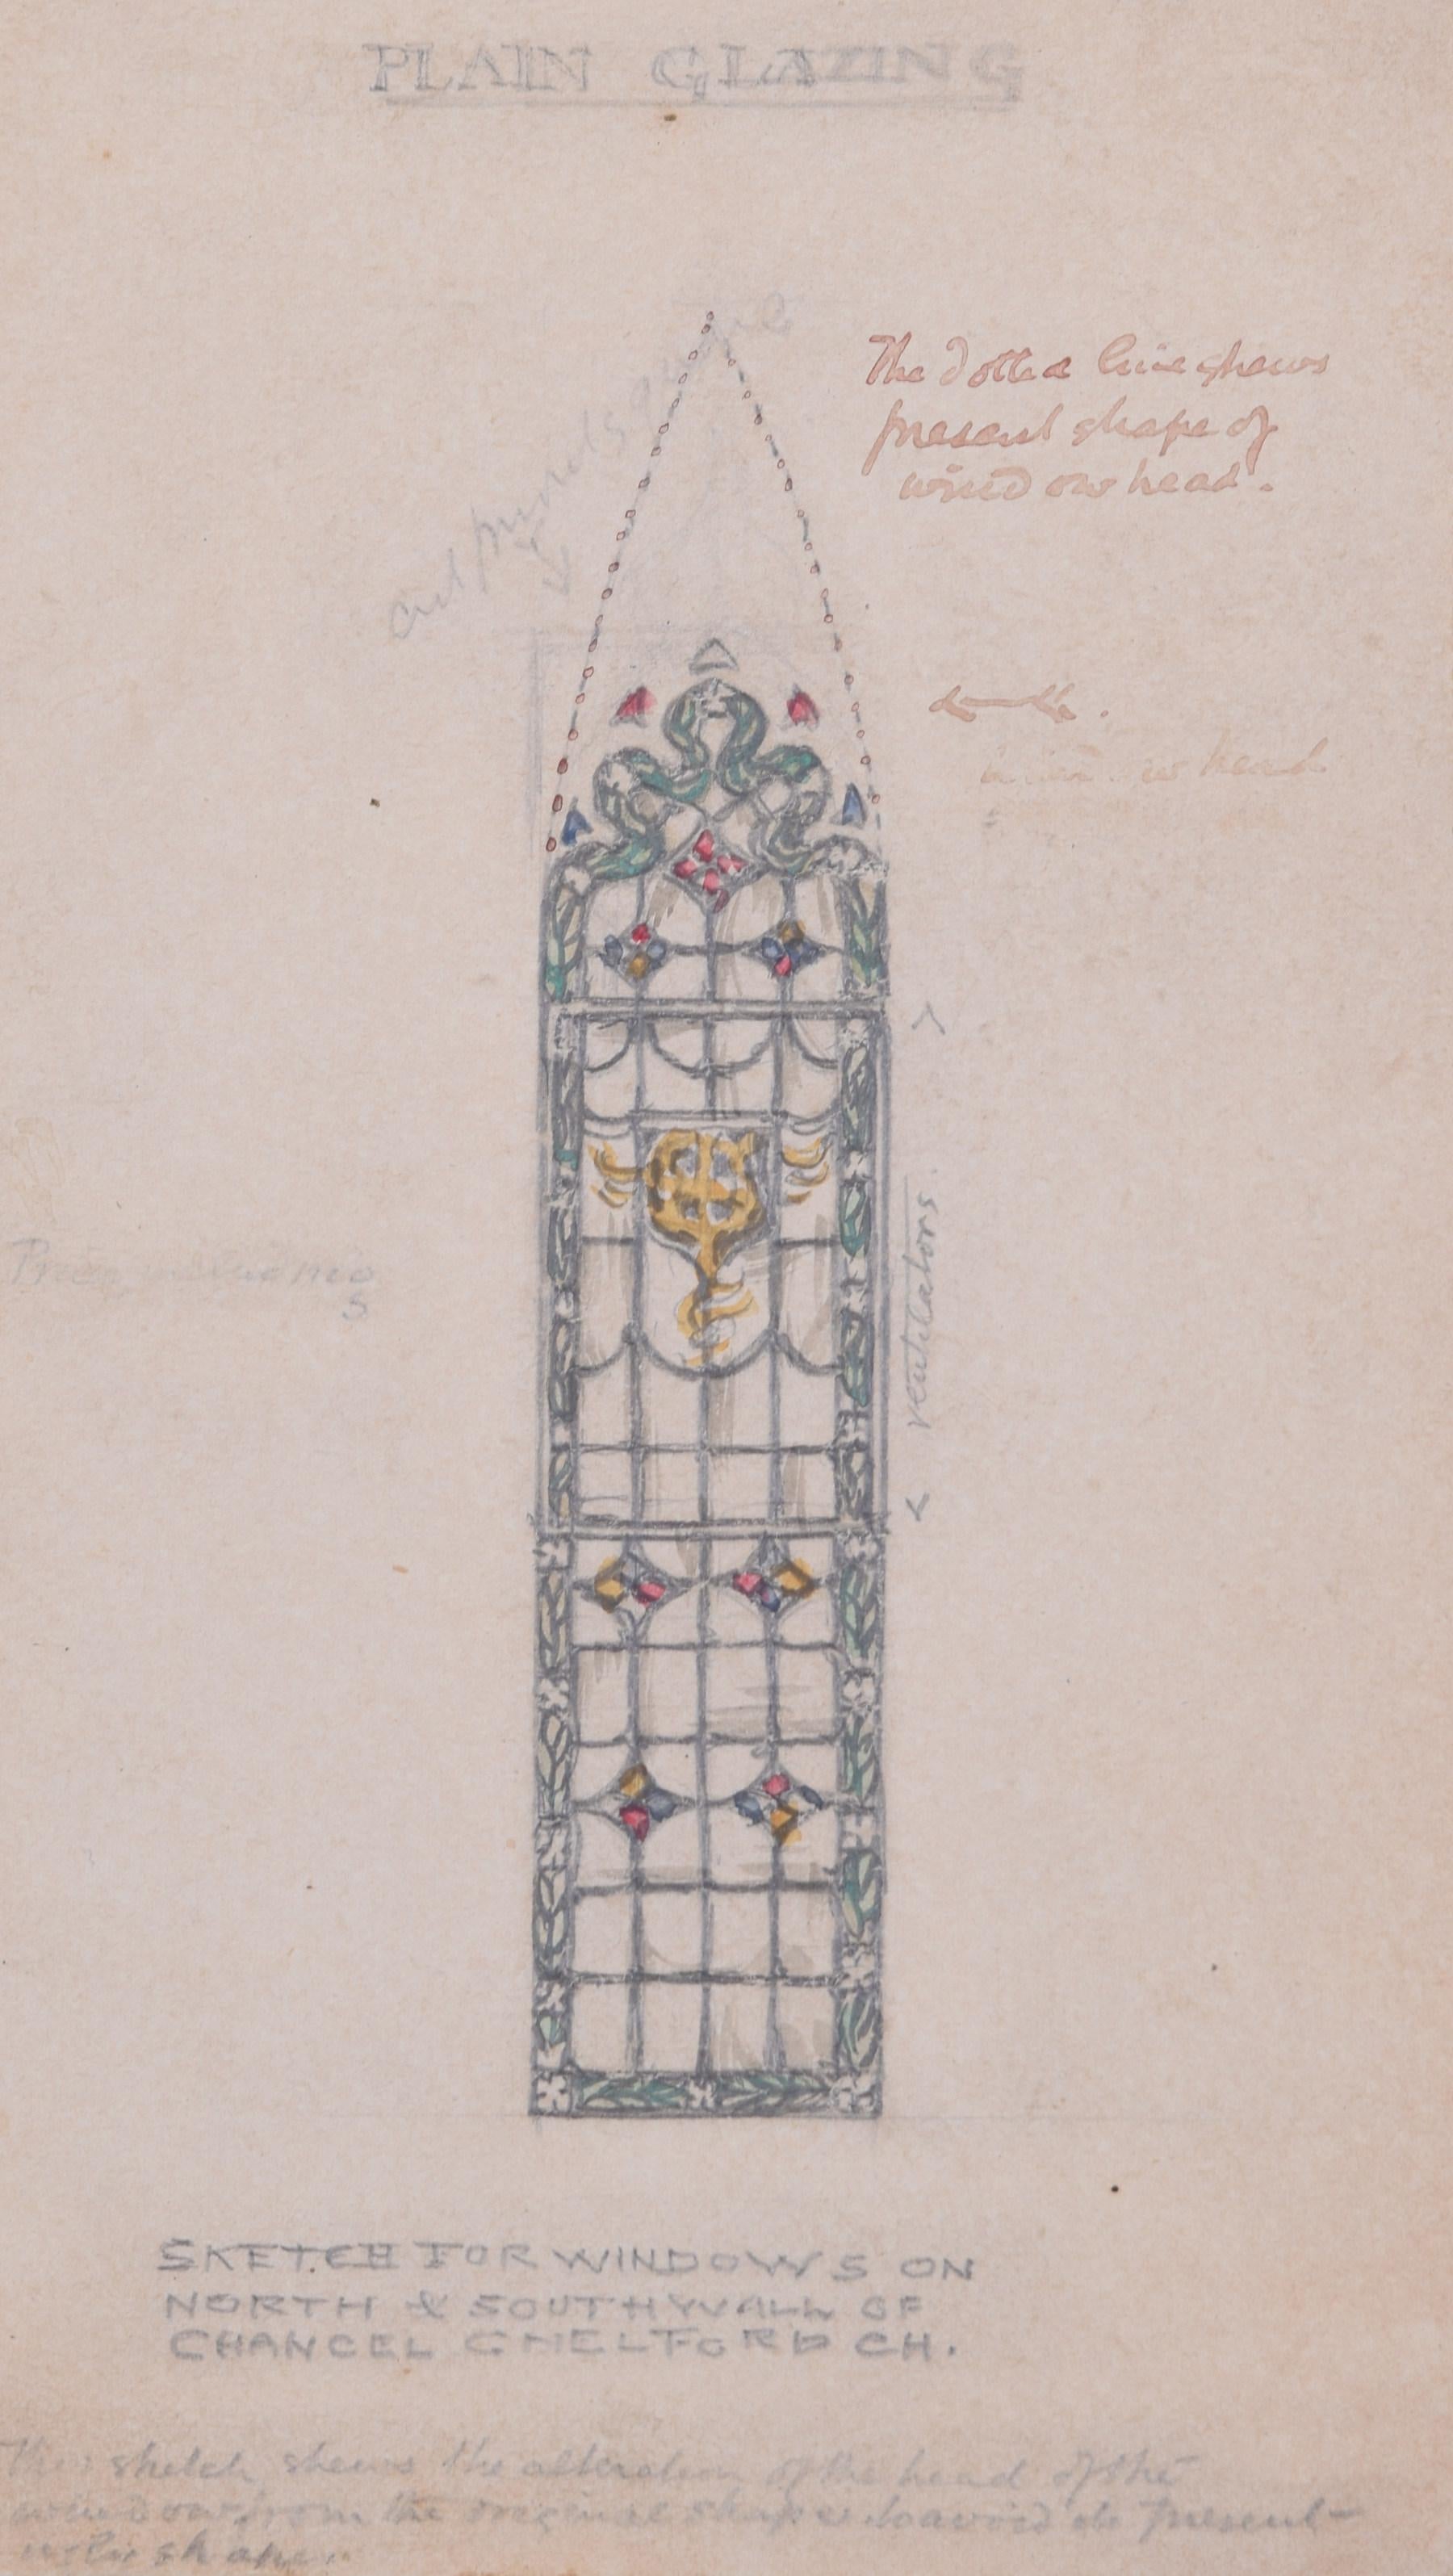 To see more, scroll down to "More from this Seller" and below it click on "See all from this Seller." 

Reginald Hallward (1858 - 1948)
Stained glass memorial design for Chelford Church
Pencil and gouache
12 x 7 cm

With pencil annotations by the